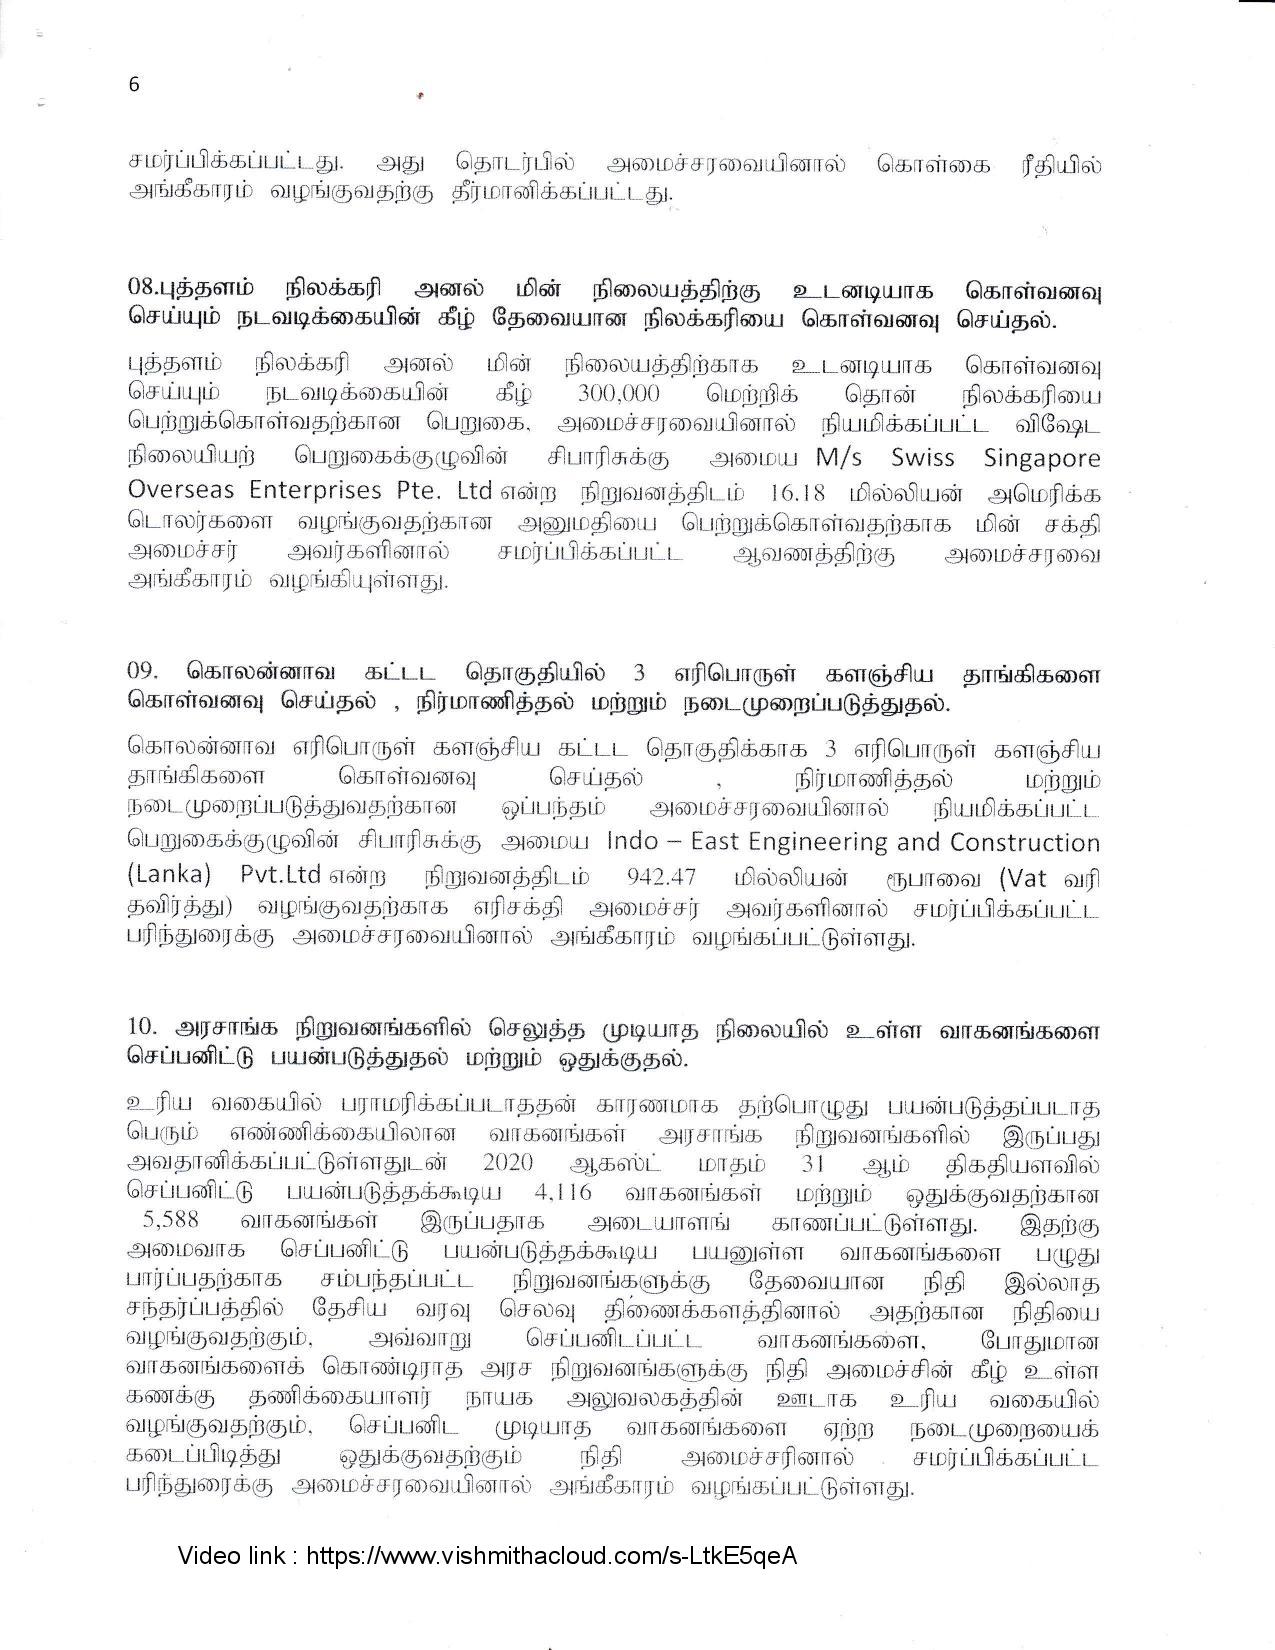 Cabinet Decision on 02.09.2020 Tamil min page 006